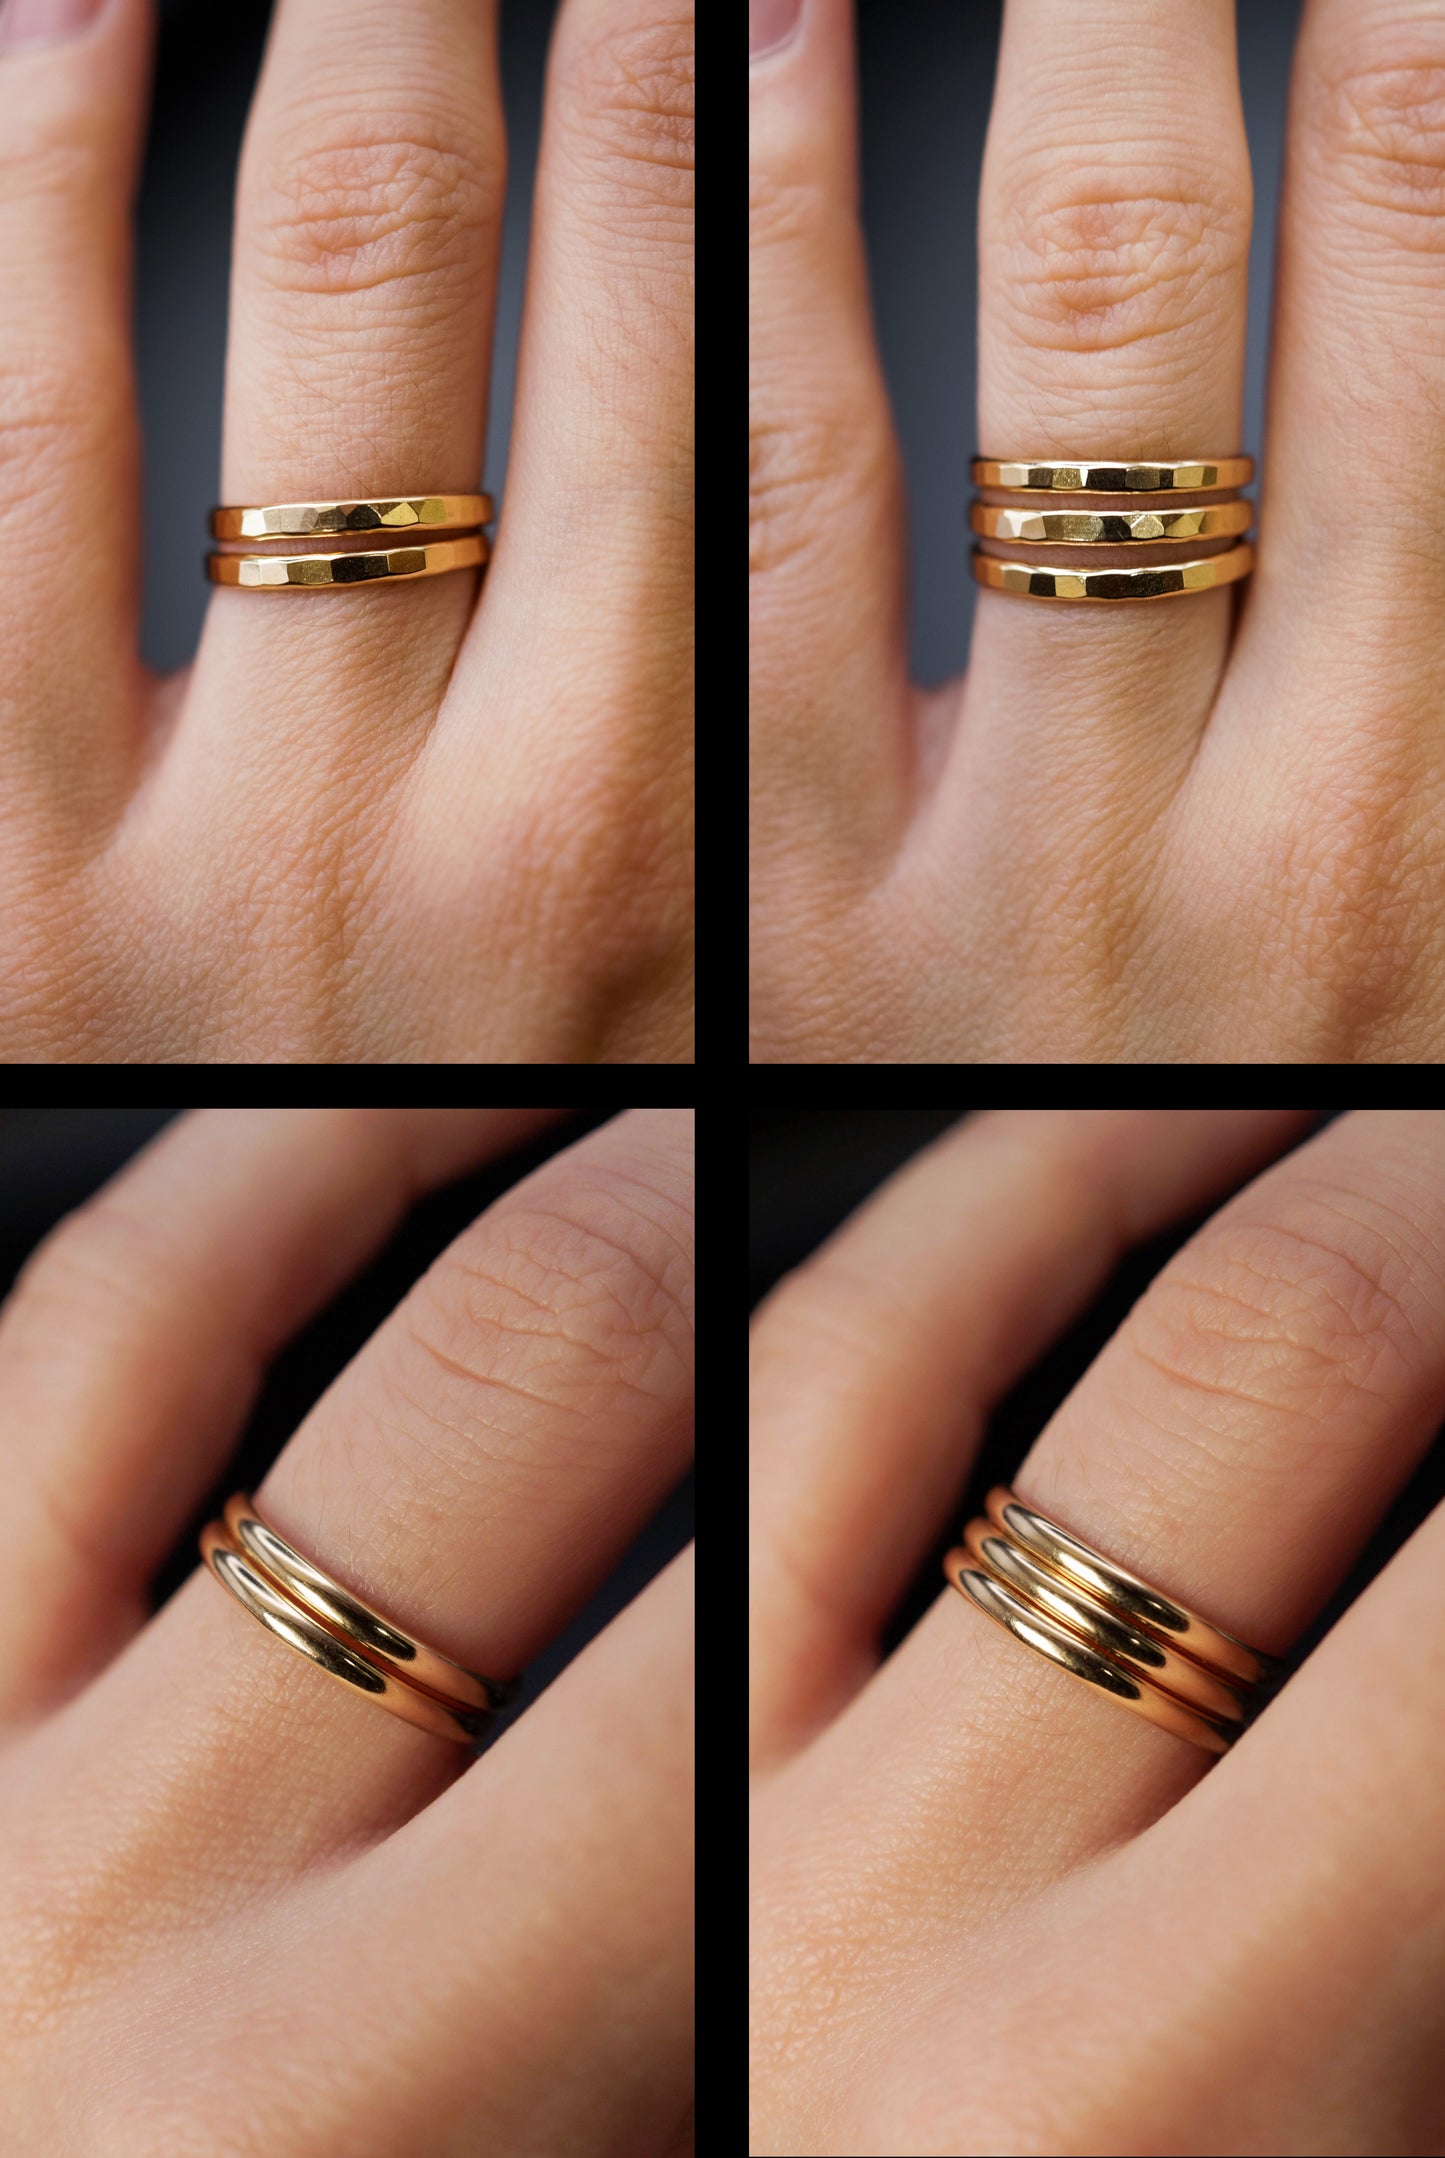 Extra Thick Ring, Solid 14K Gold